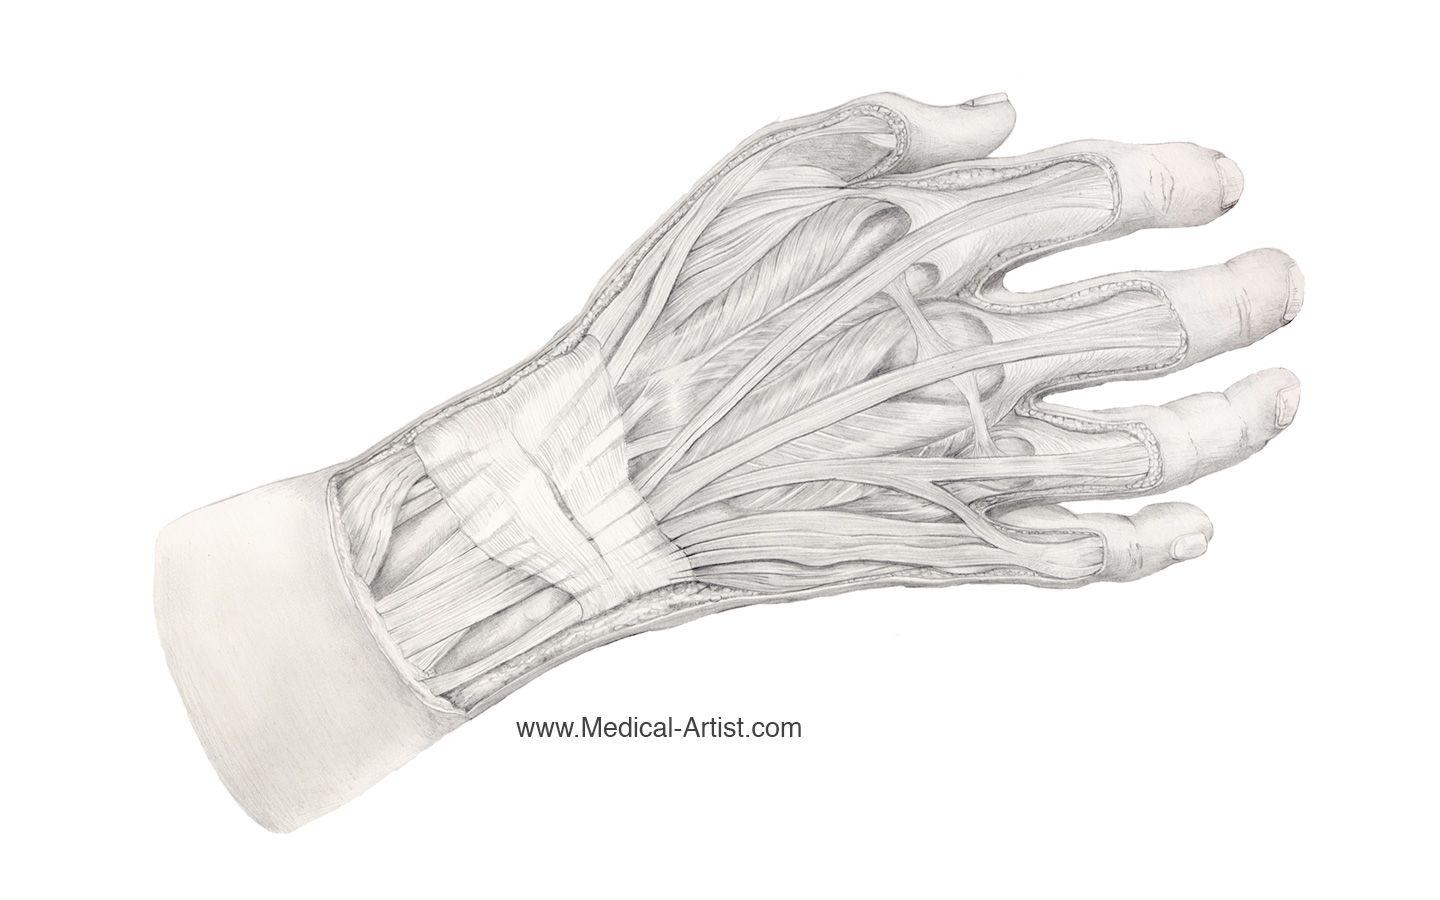 Free PC and iPhone Wallpaper. Medical Illustration Wallpaper